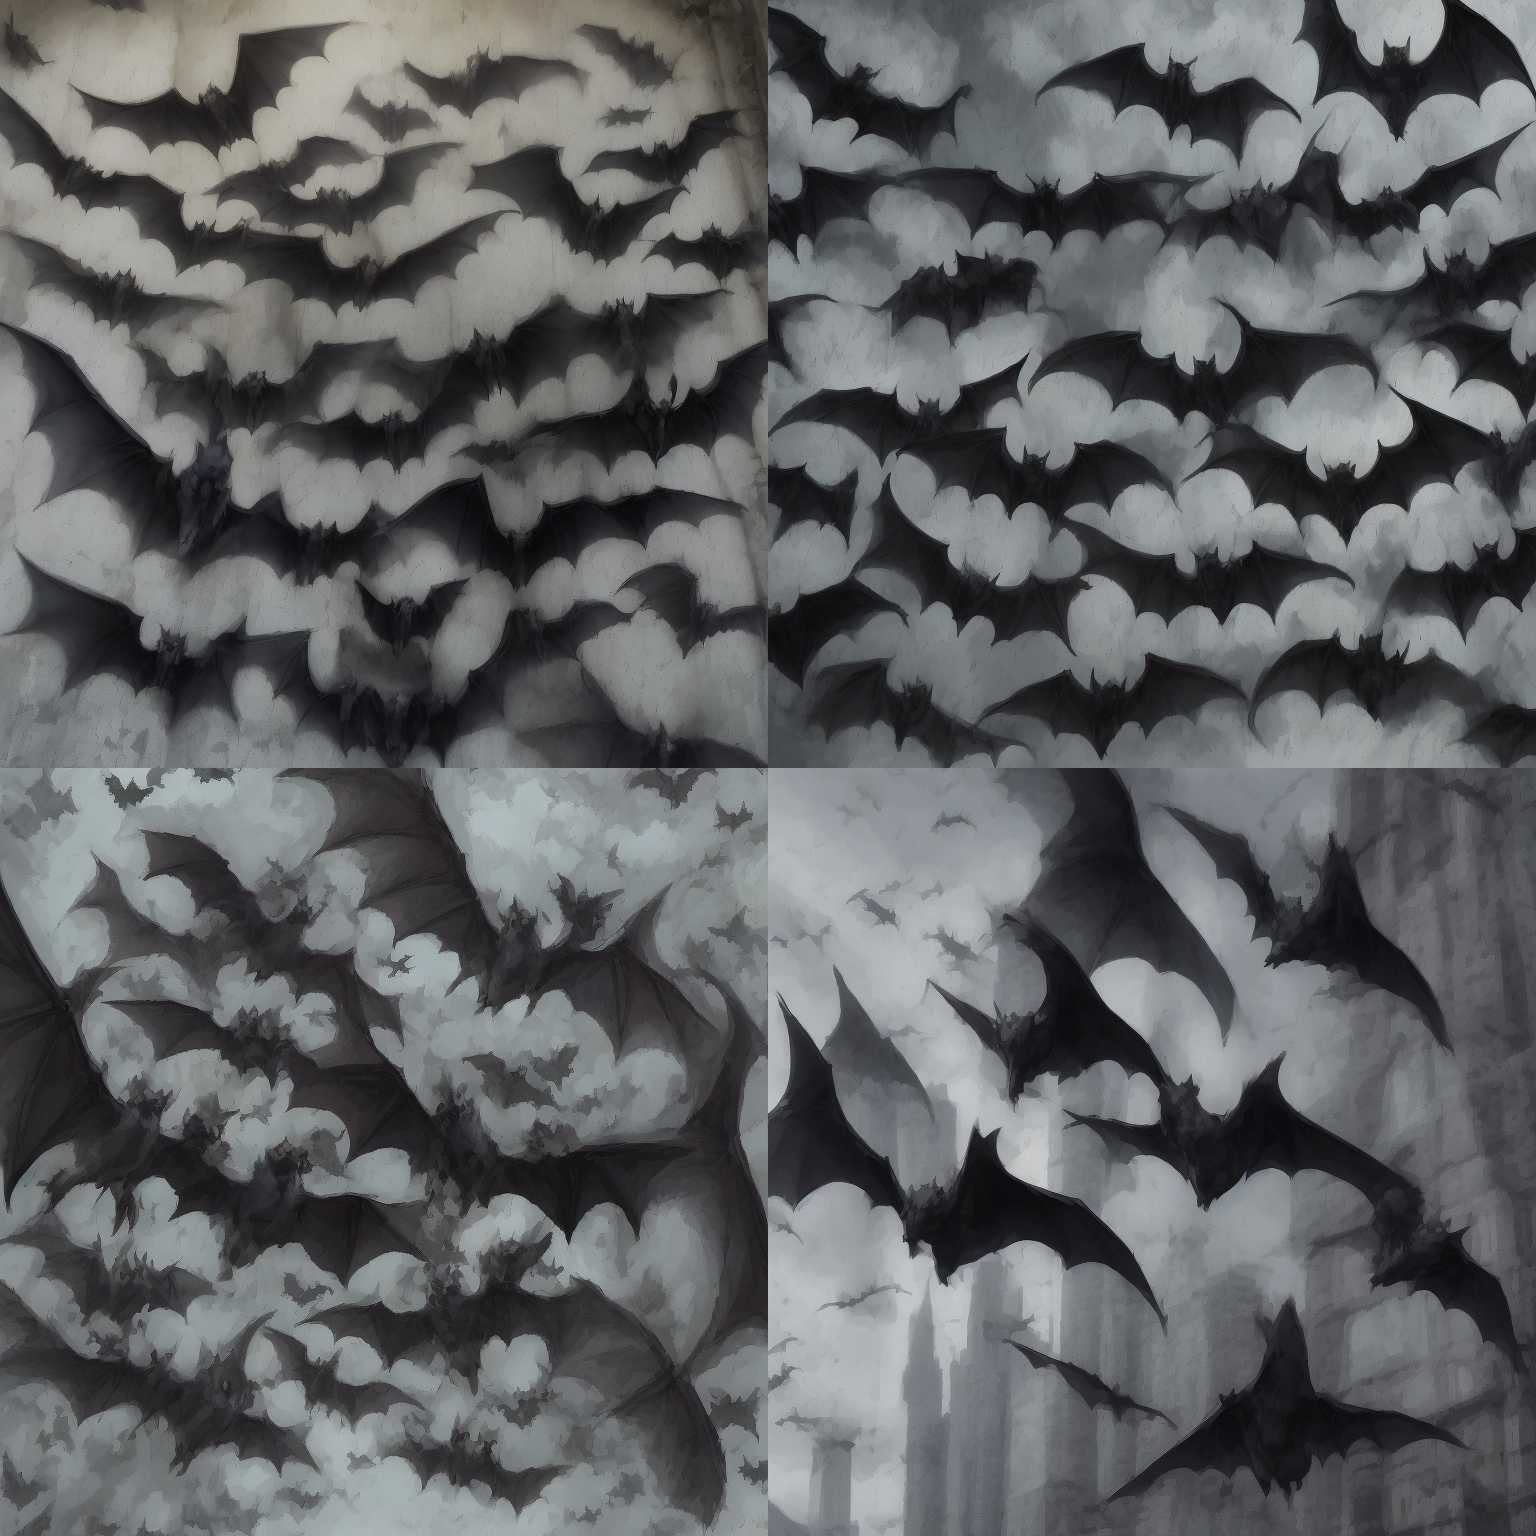 Bats during the day